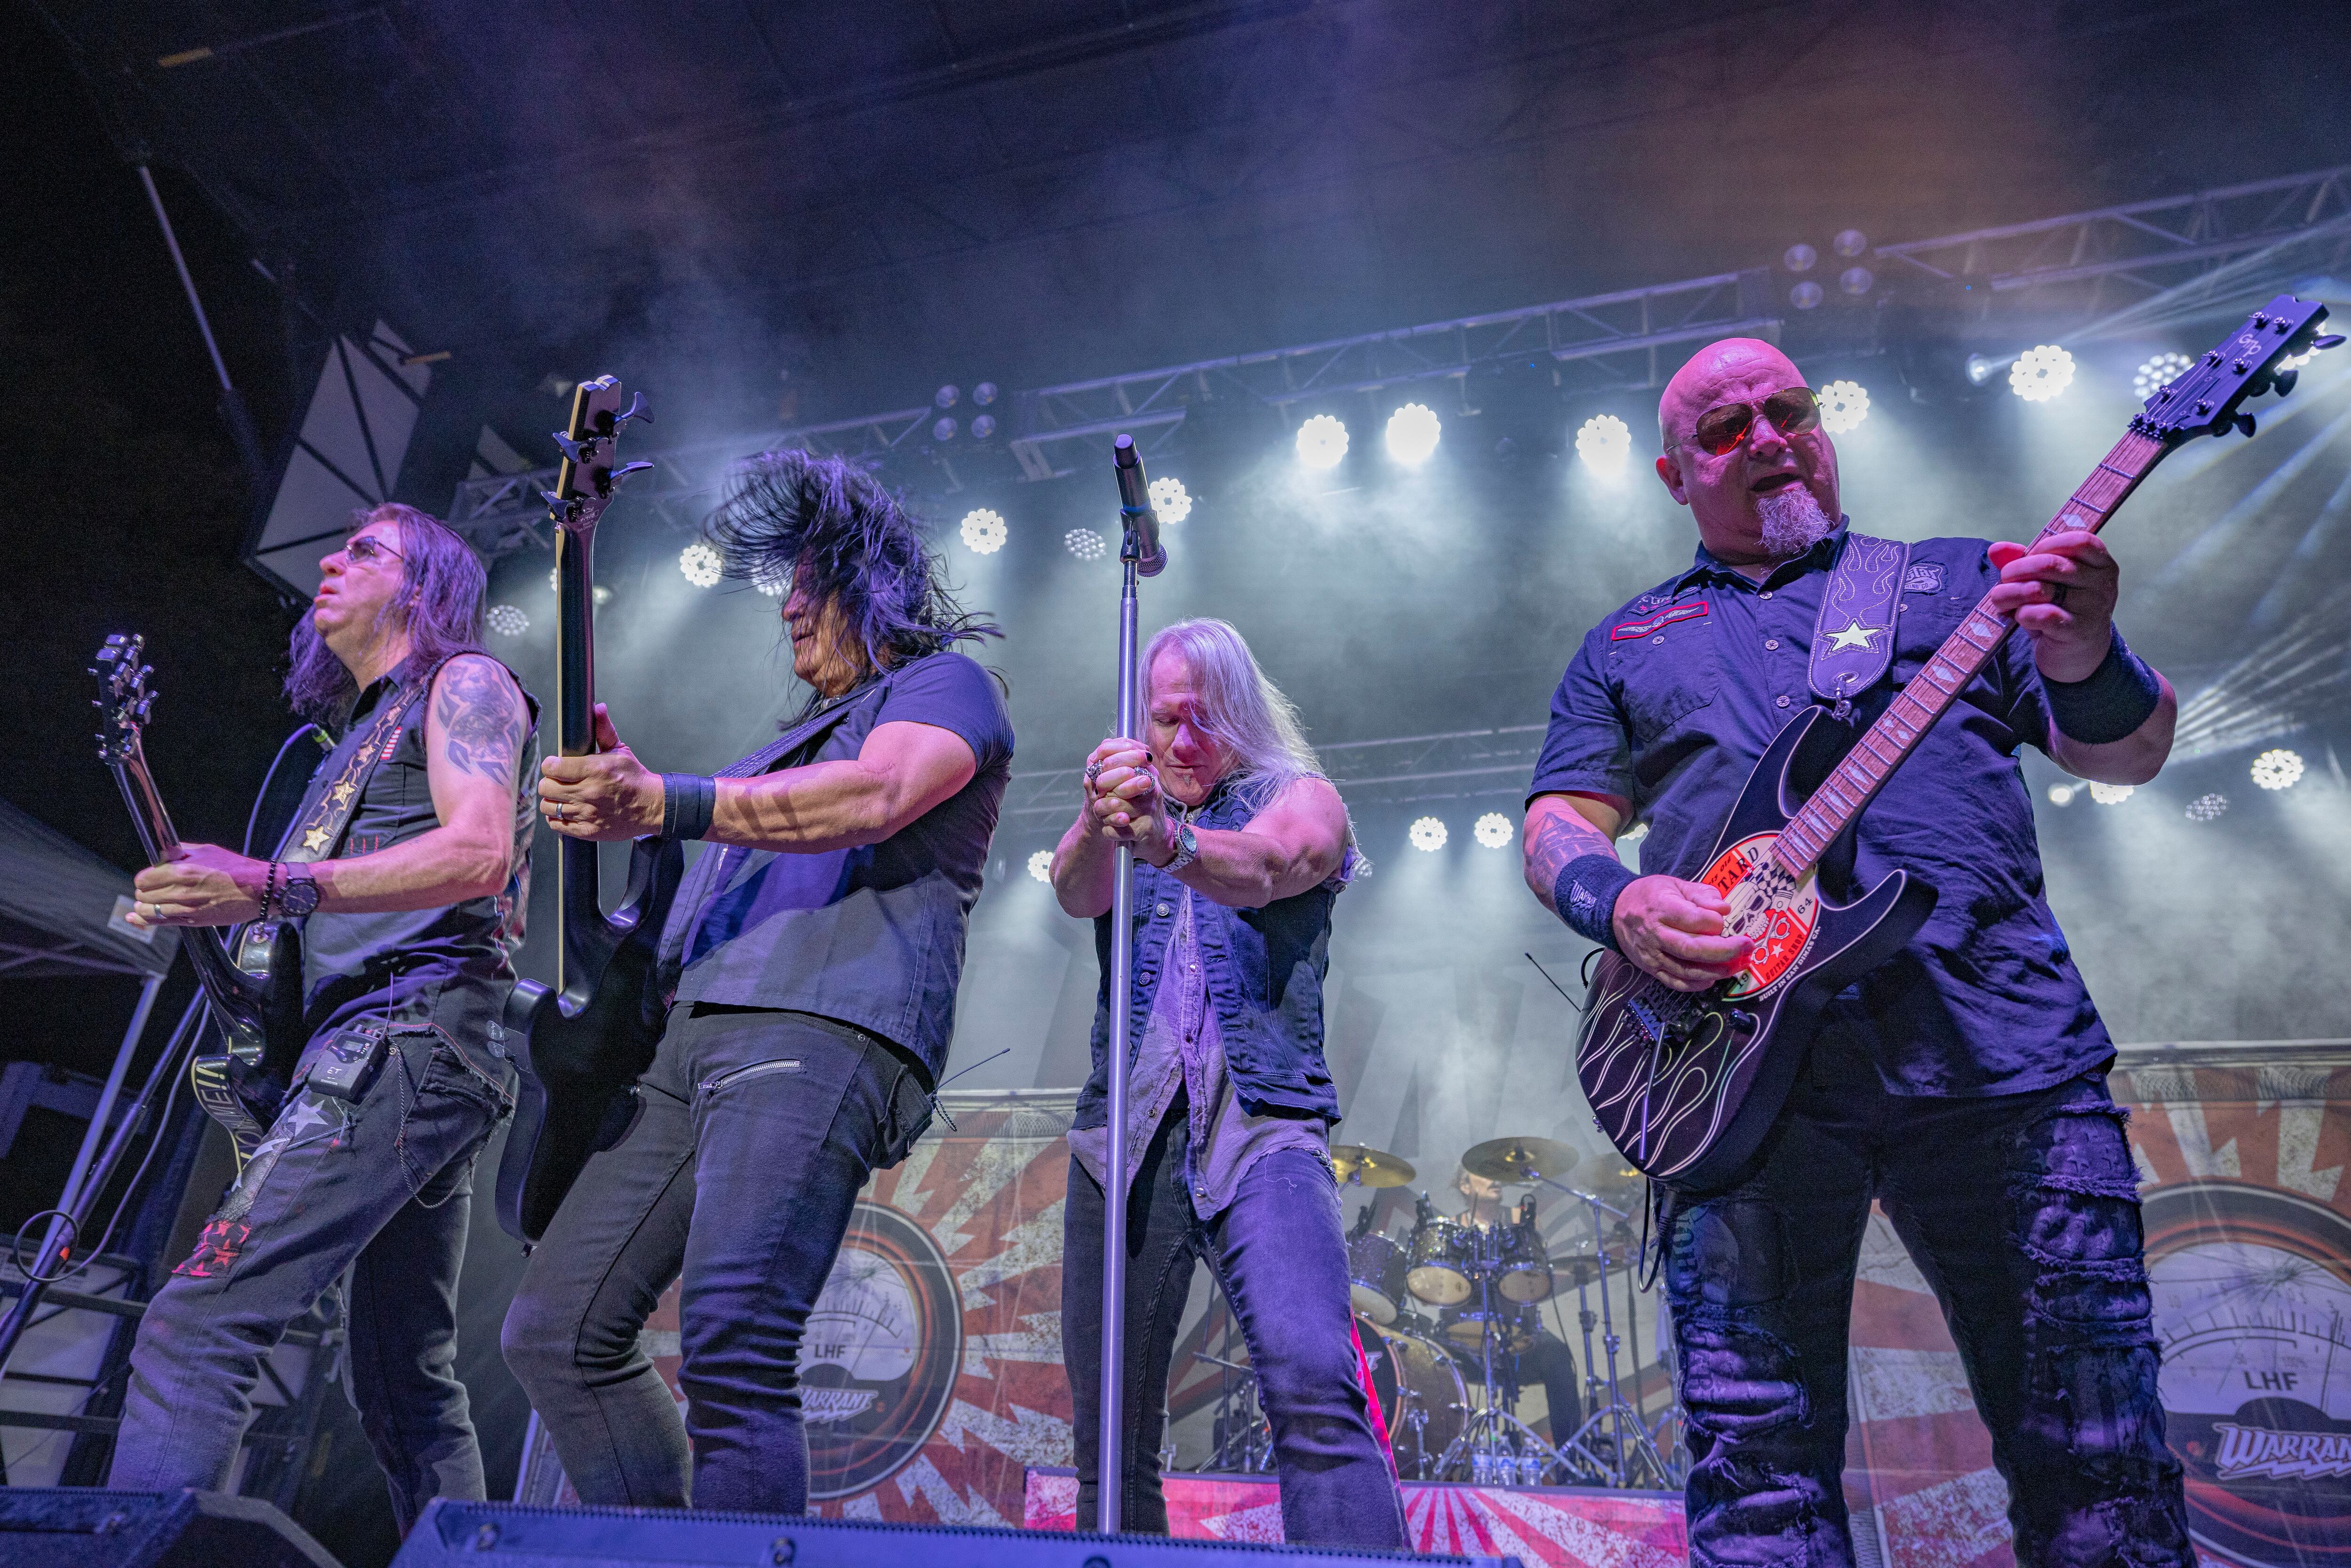 Warrant, a 1980s hair metal band, rocked the Streator Fest stage Saturday, Aug, 6, 2023, at Northpoint Plaza.